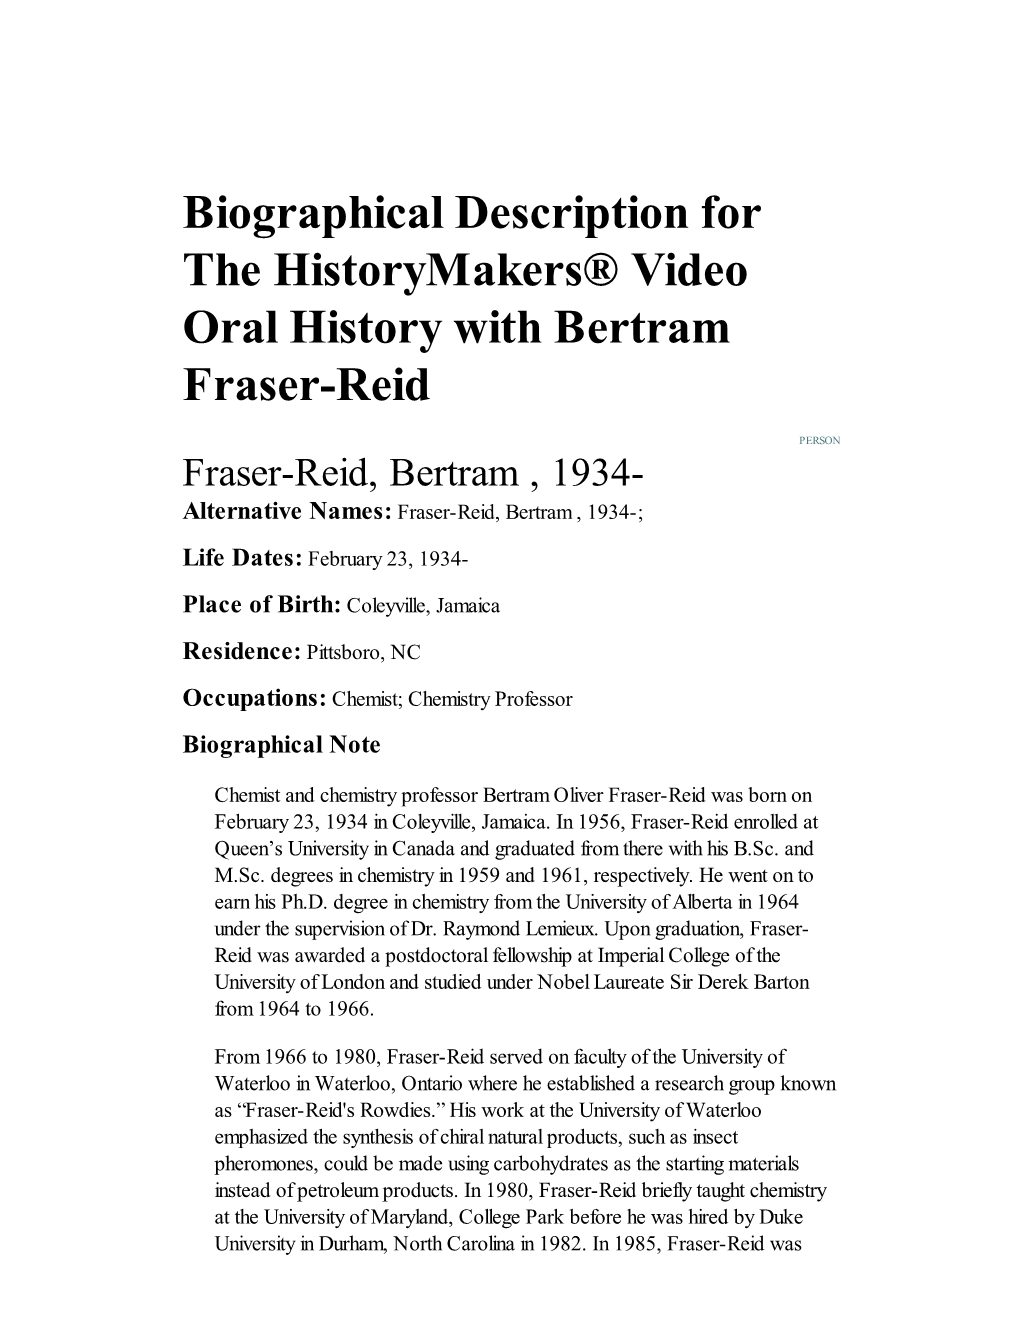 Biographical Description for the Historymakers® Video Oral History with Bertram Fraser-Reid